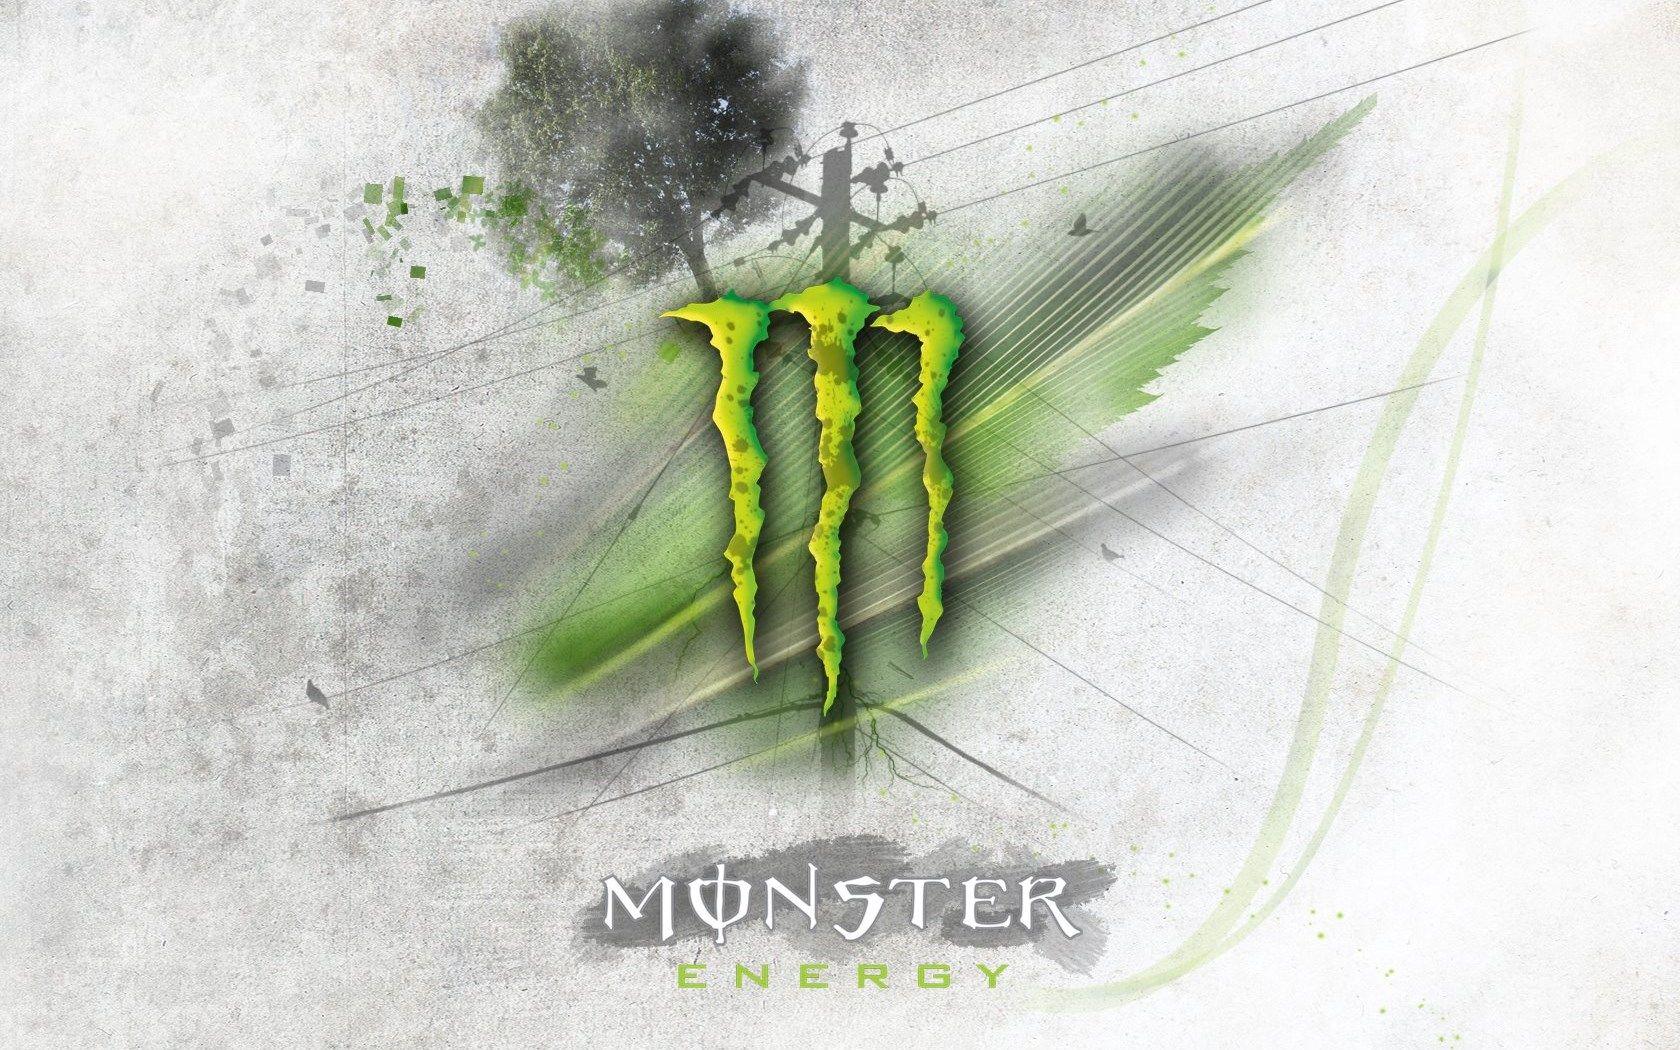 Monster Energy Wallpaper HD Wallpaper Background Of Your Choice